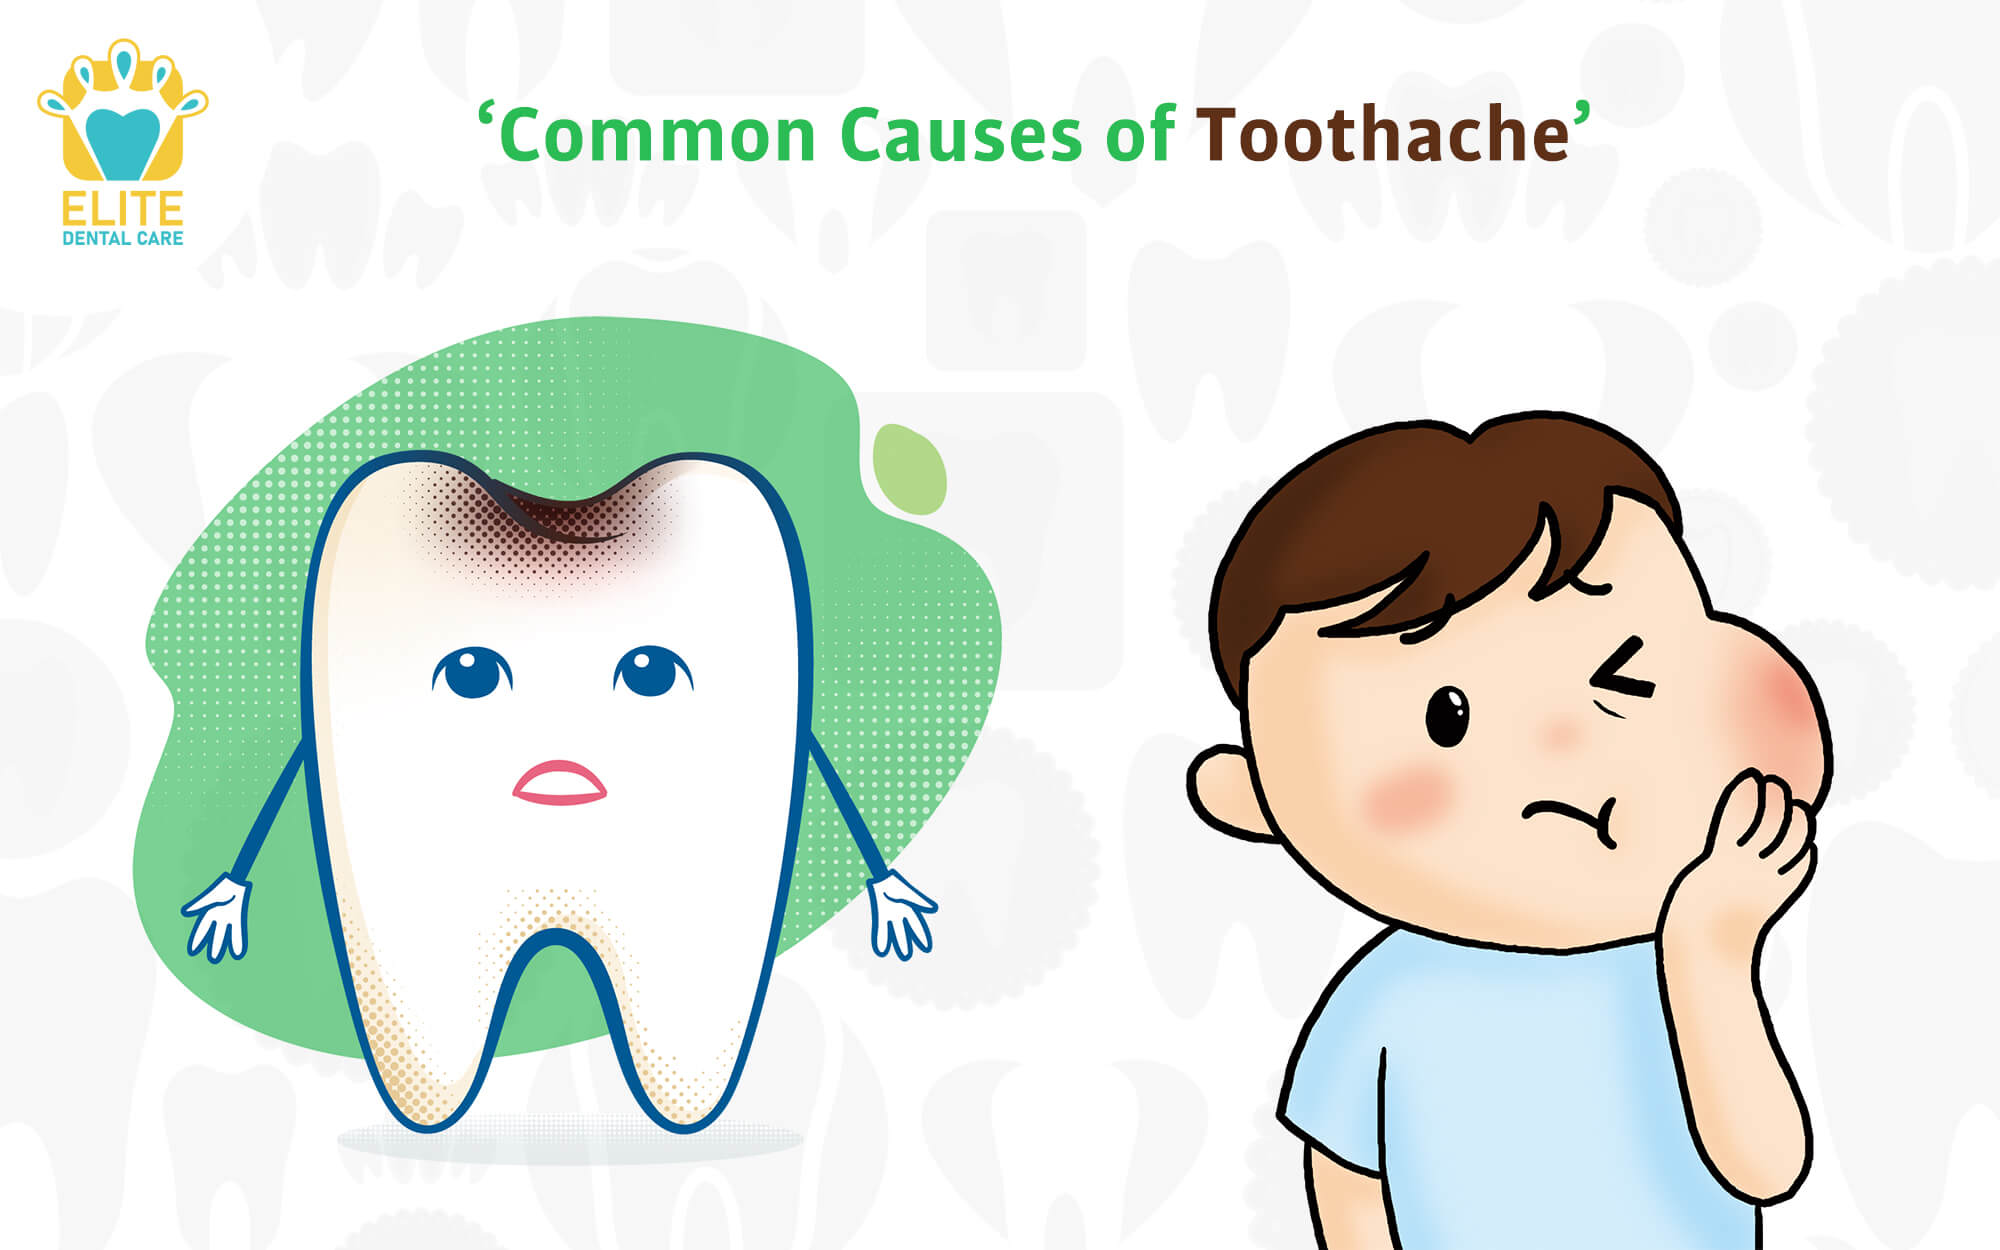 COMMON CAUSES OF TOOTHACHE